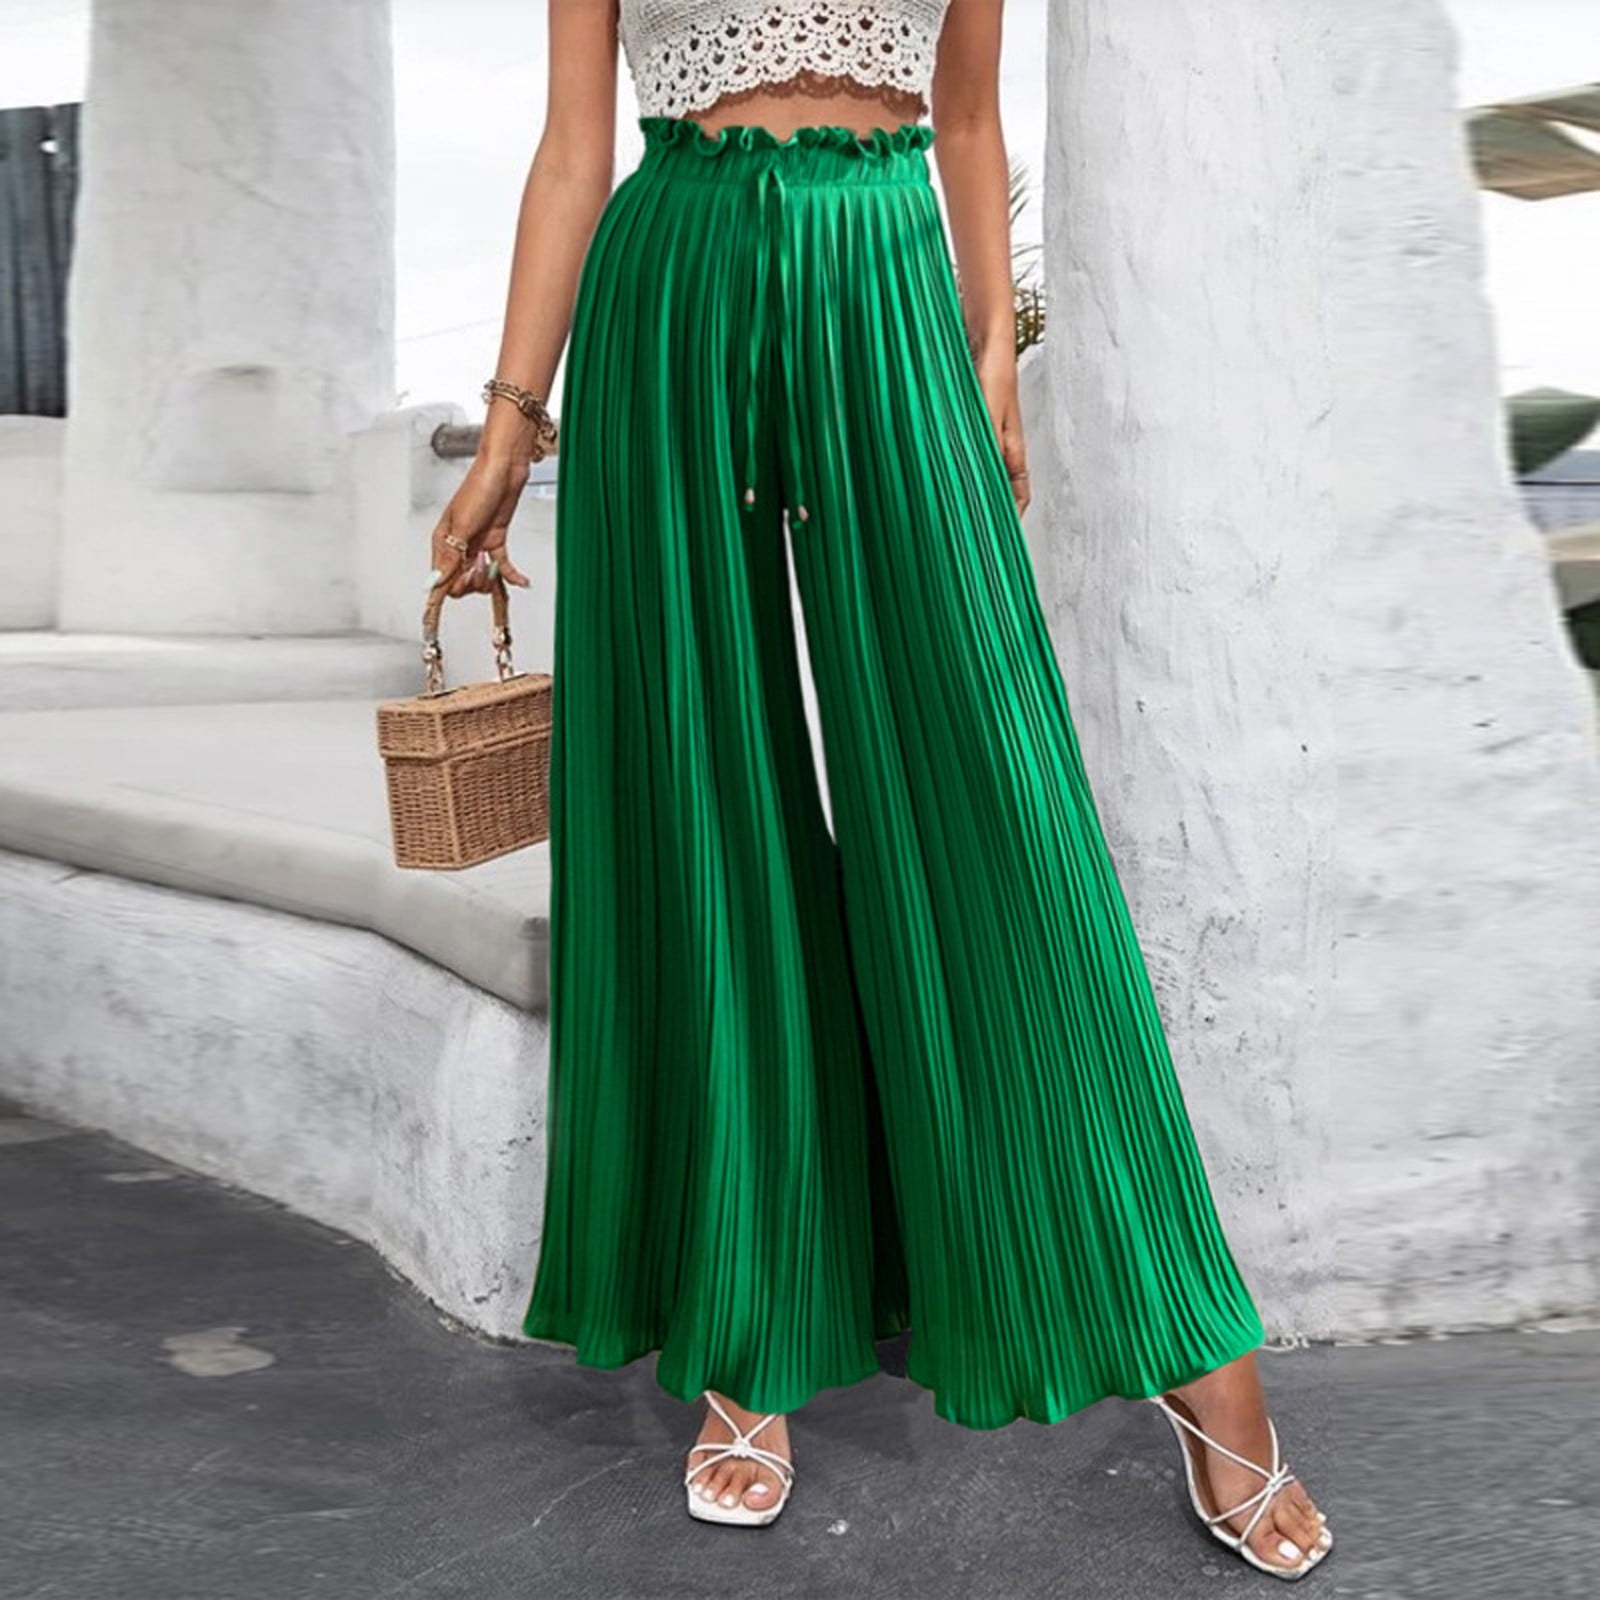 Buy Xiaoxuemeng Women's Tiered Palazzo Pants Flowy Elastic High Waisted  Wide Leg Beach Pants, Blue, Medium at Amazon.in